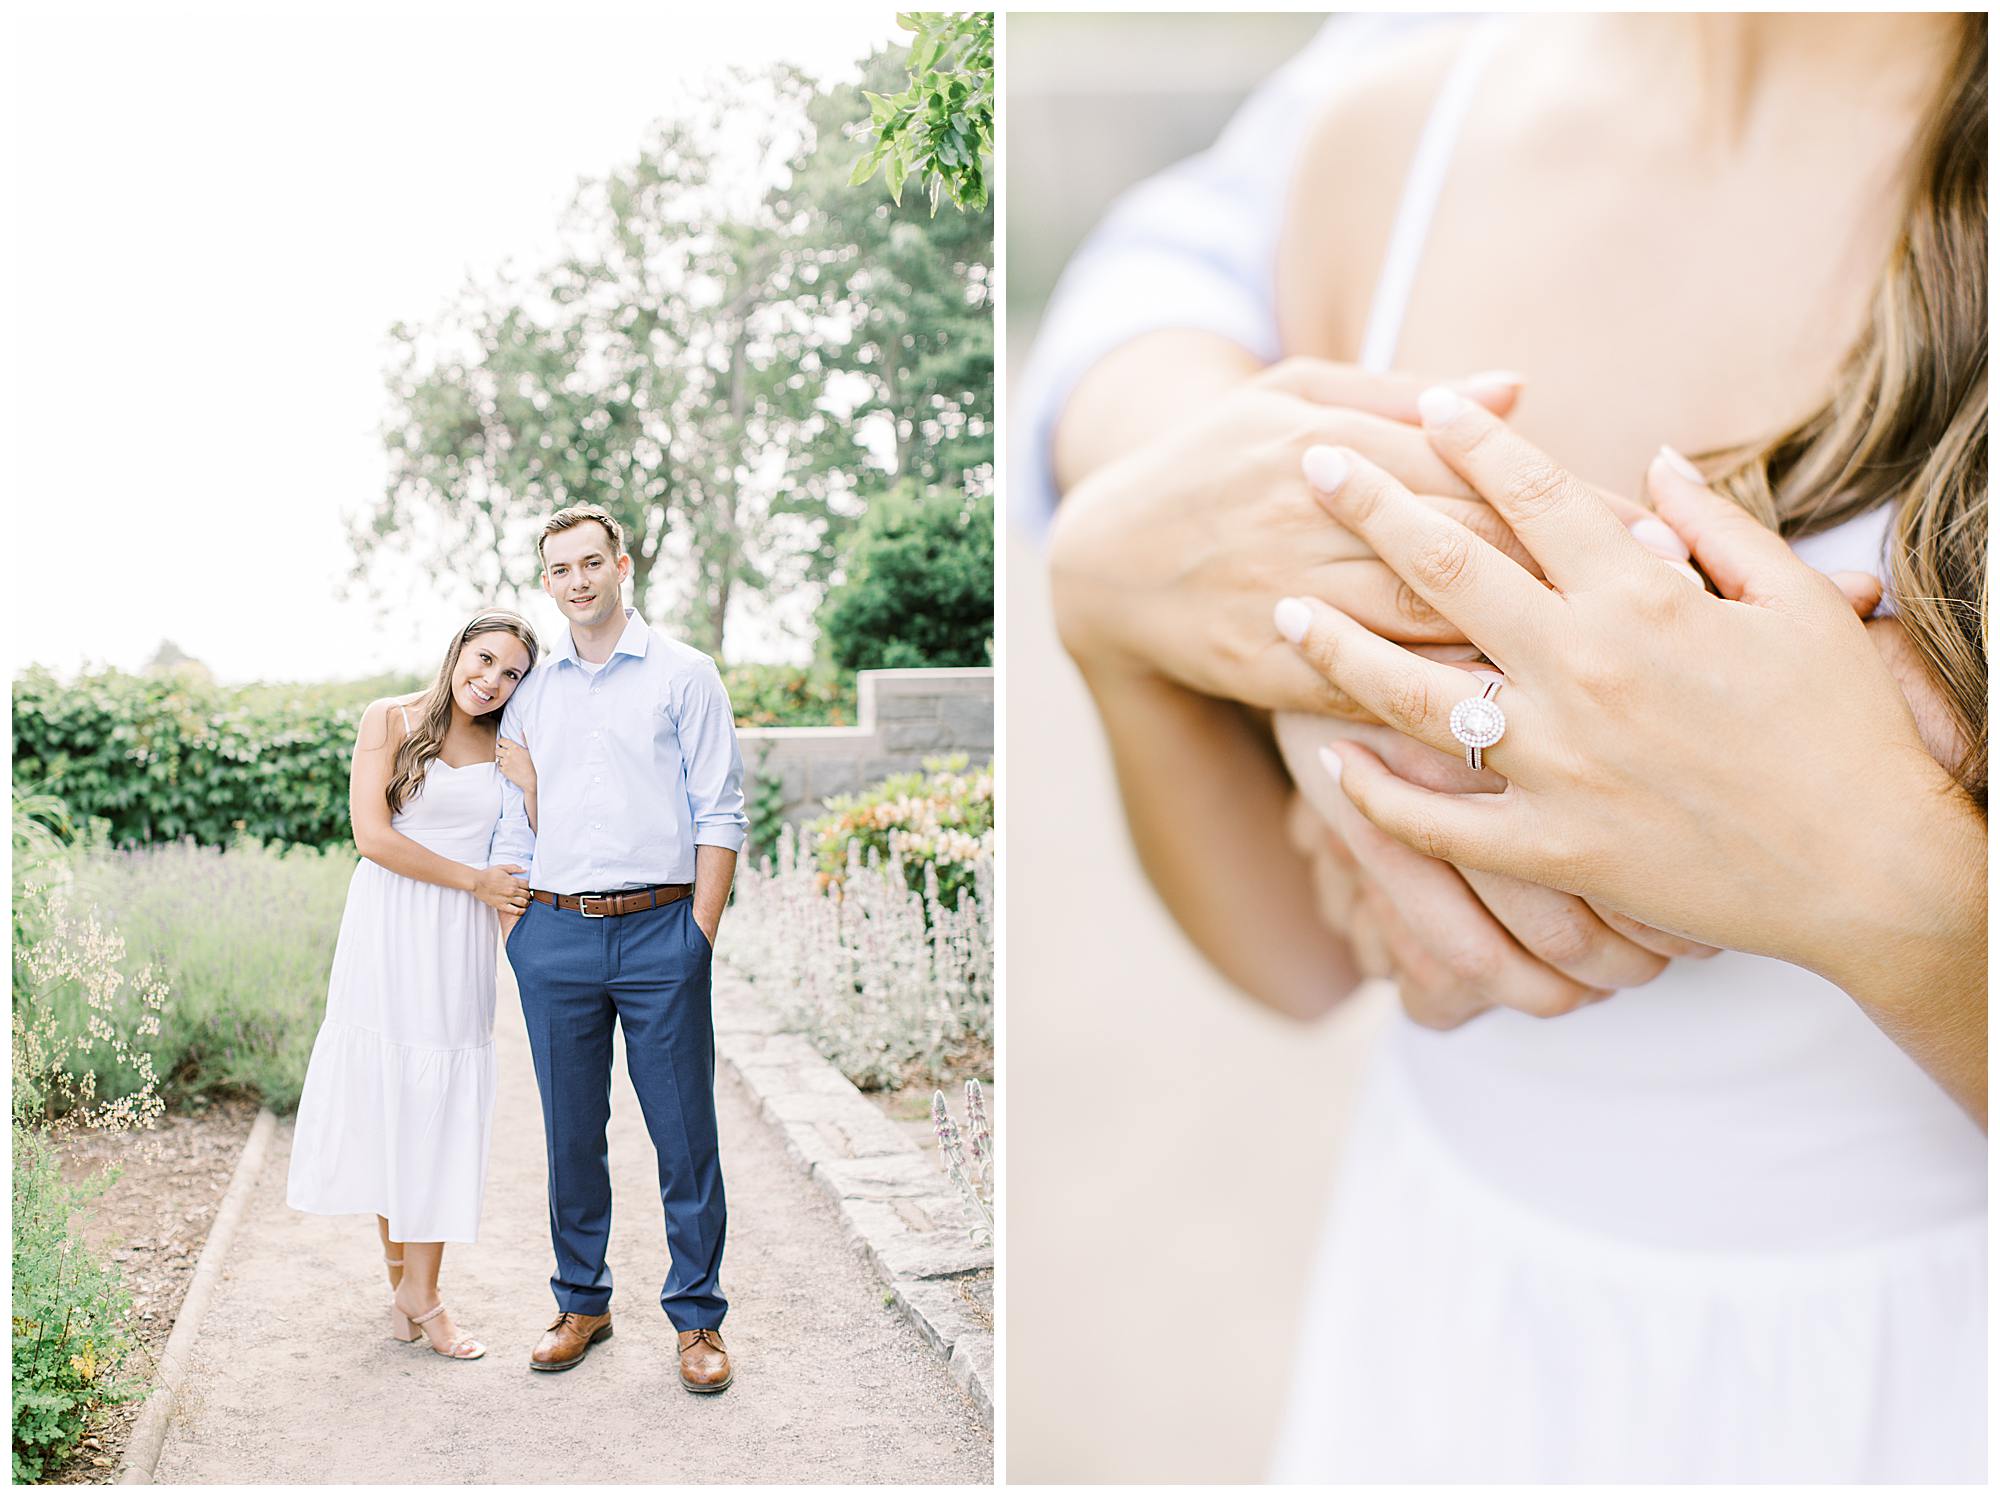 A Joy-Filled Engagement at Harkness Park